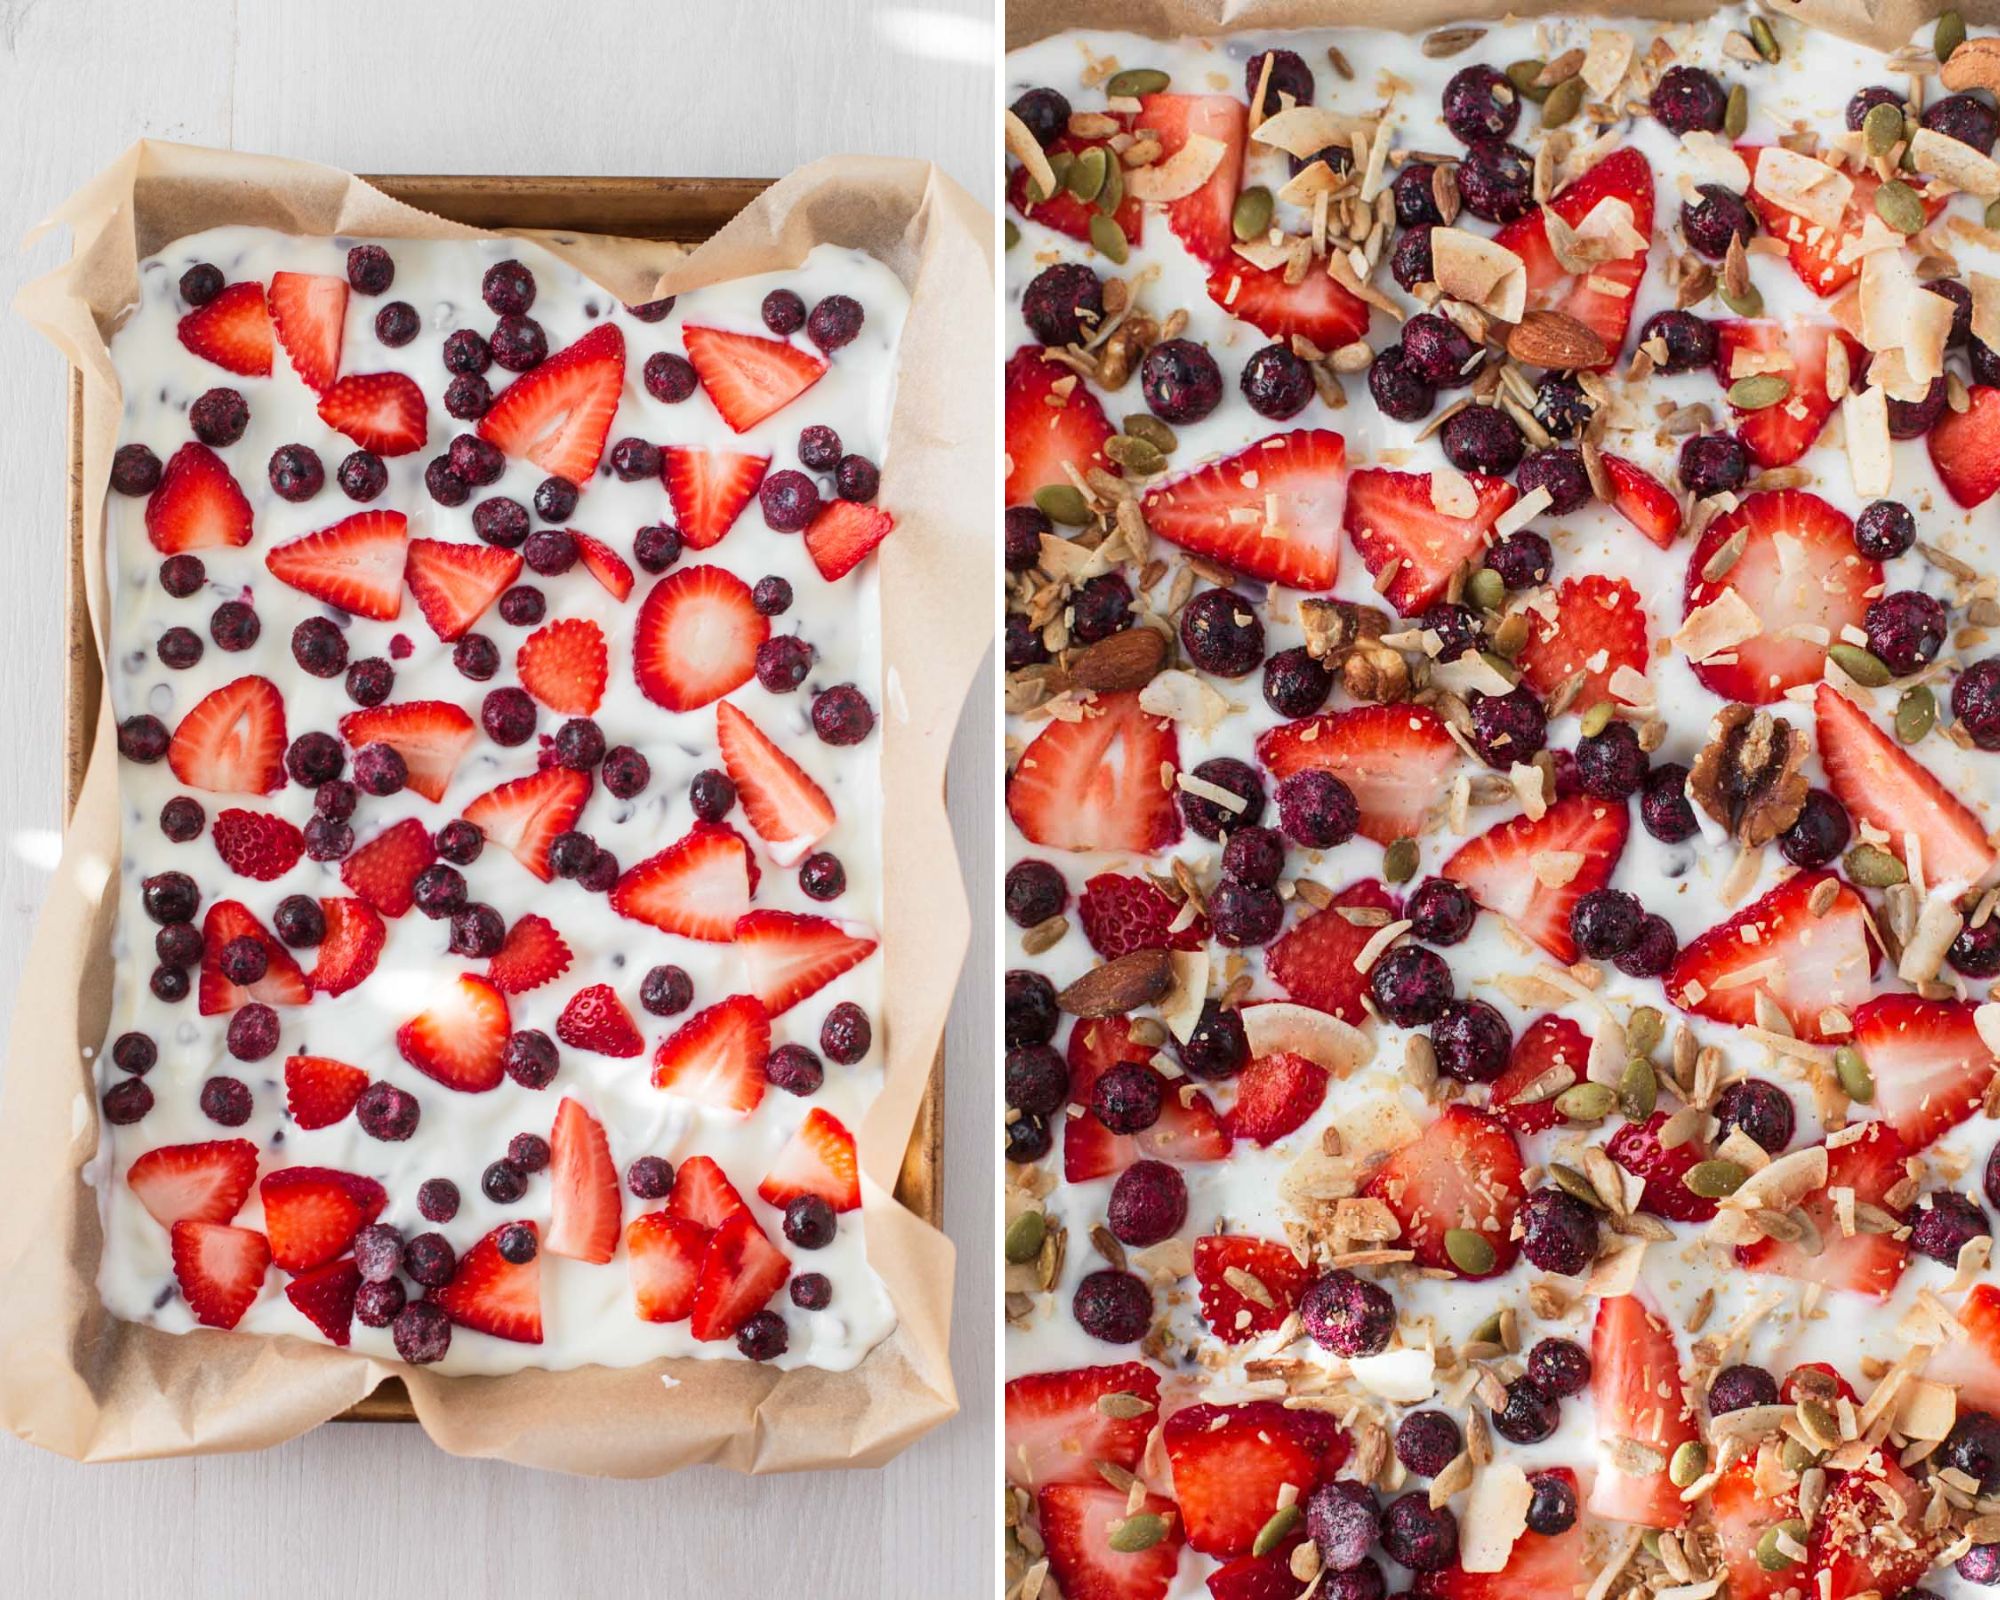 Topping yogurt base with sliced strawberries, blueberries and granola